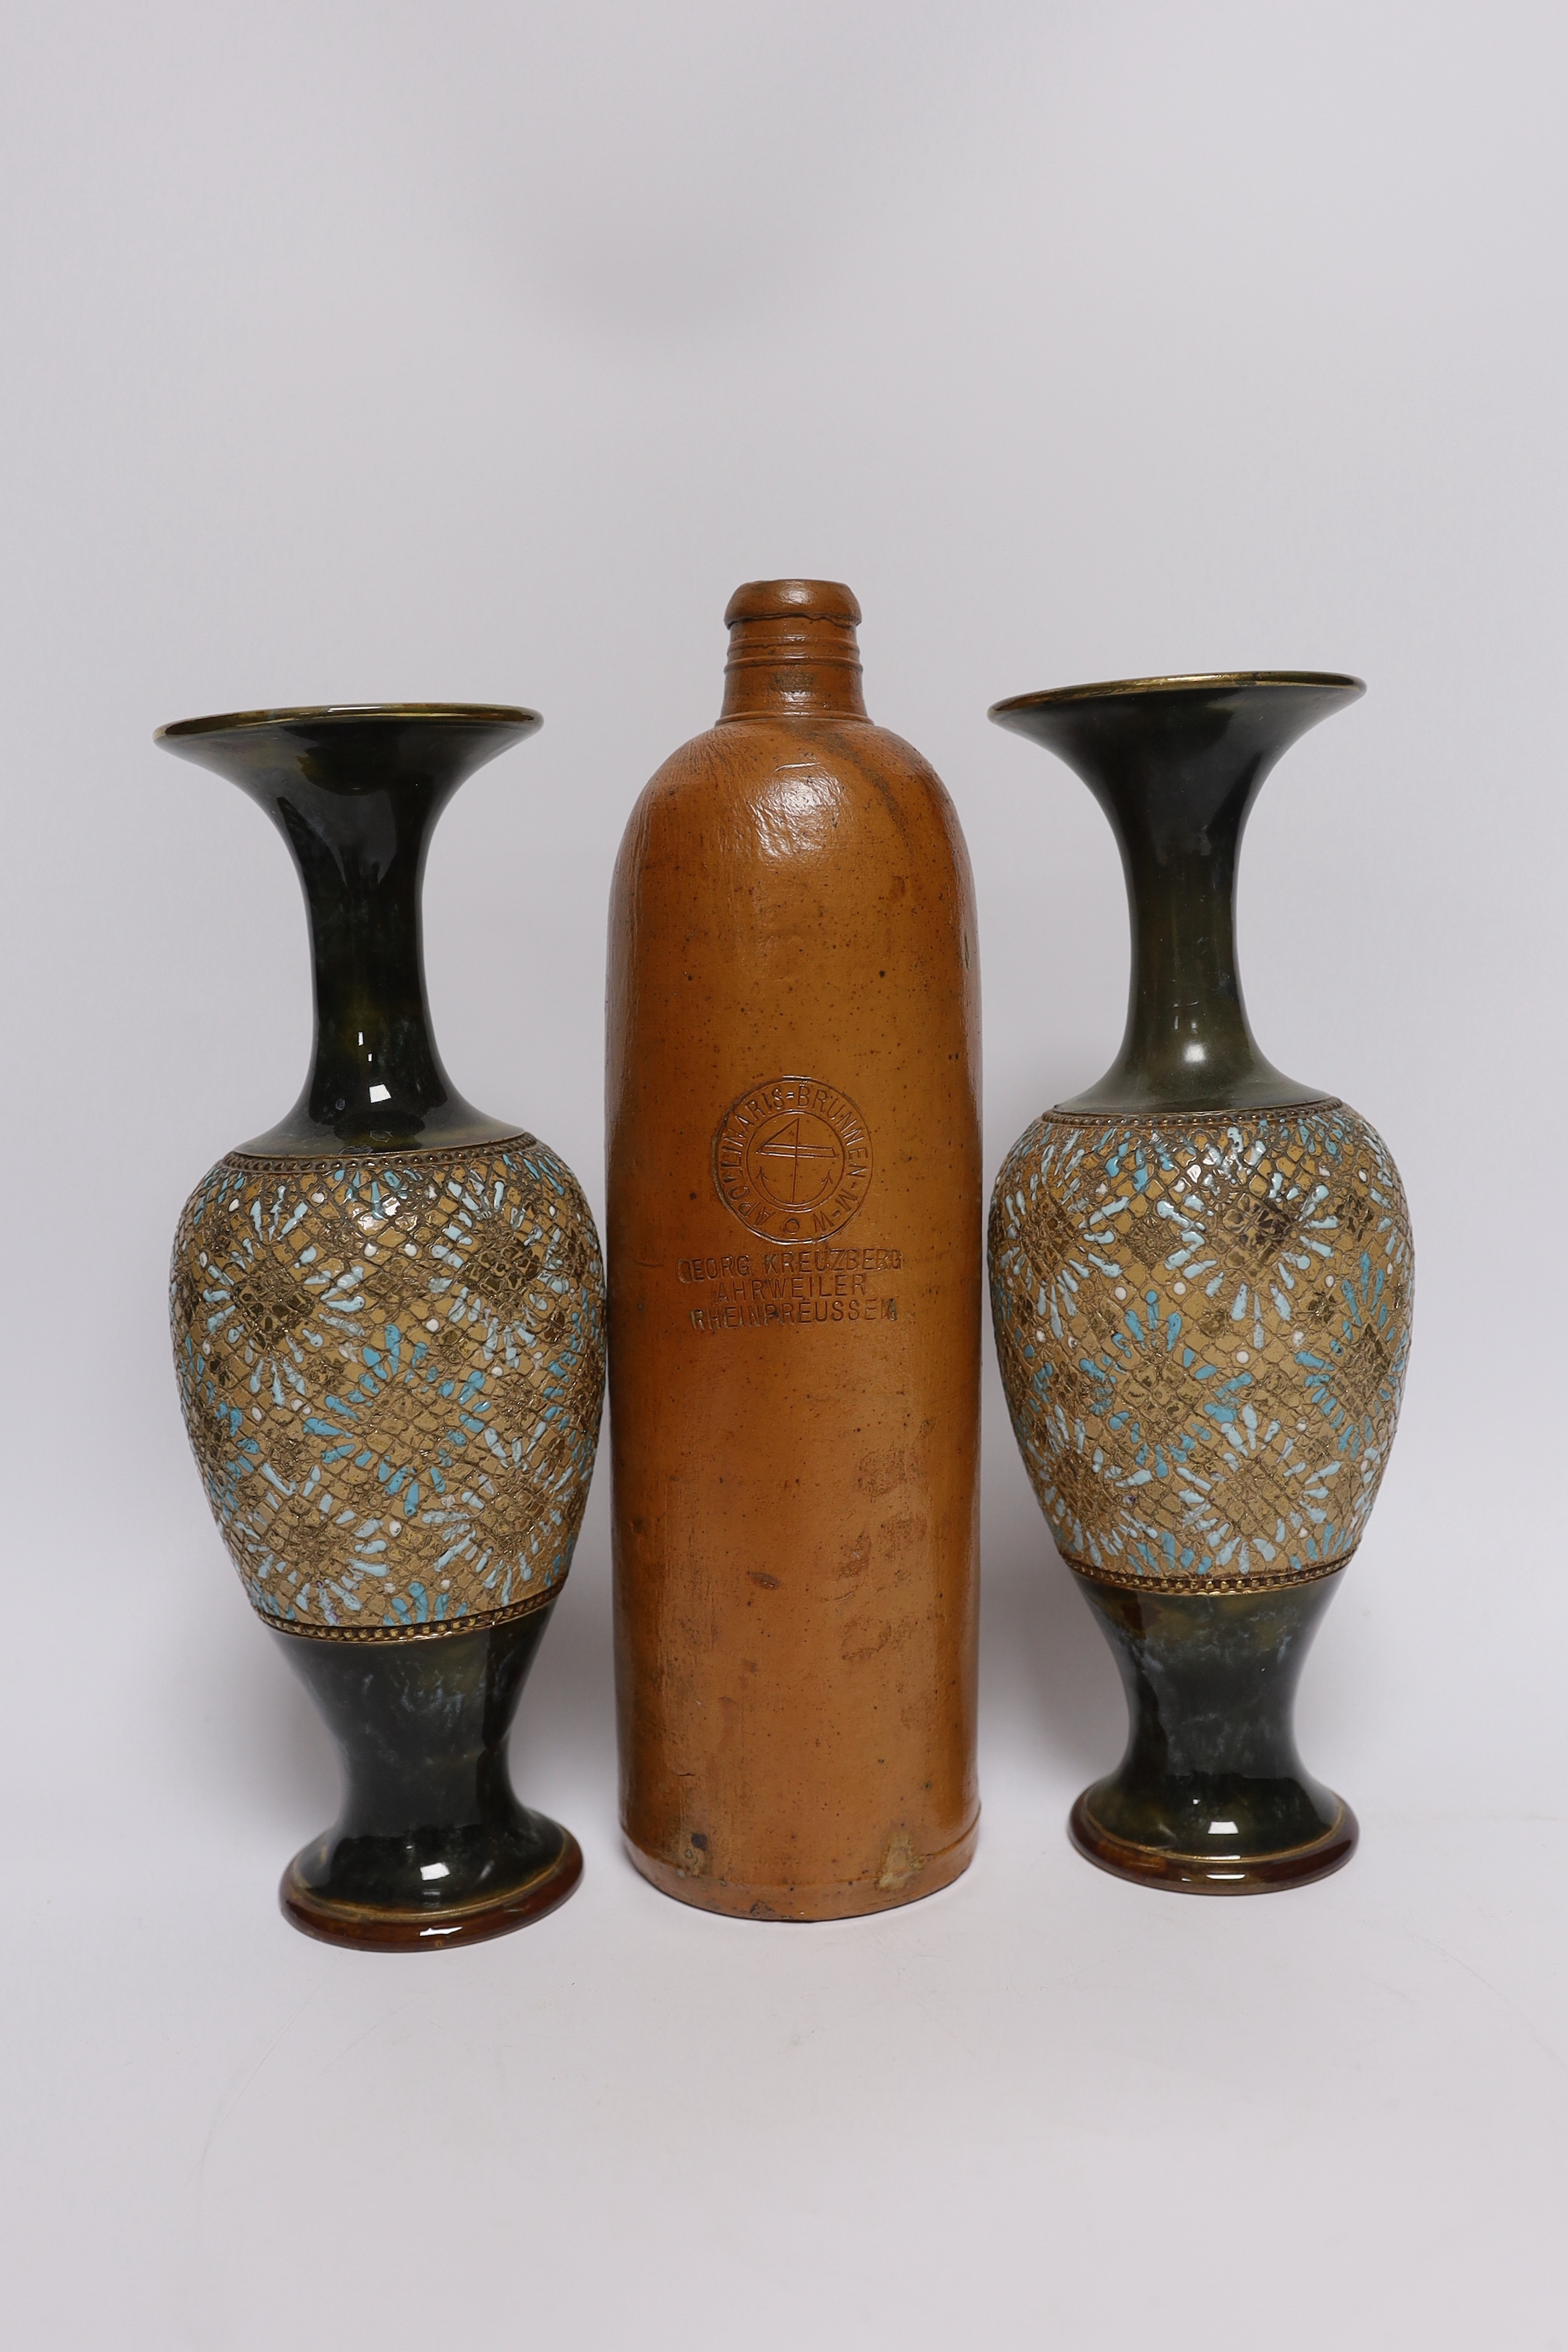 A pair of Doulton Lambeth vases, three jars, two with covers and a Georg Kreuzberg terracotta - Image 4 of 4